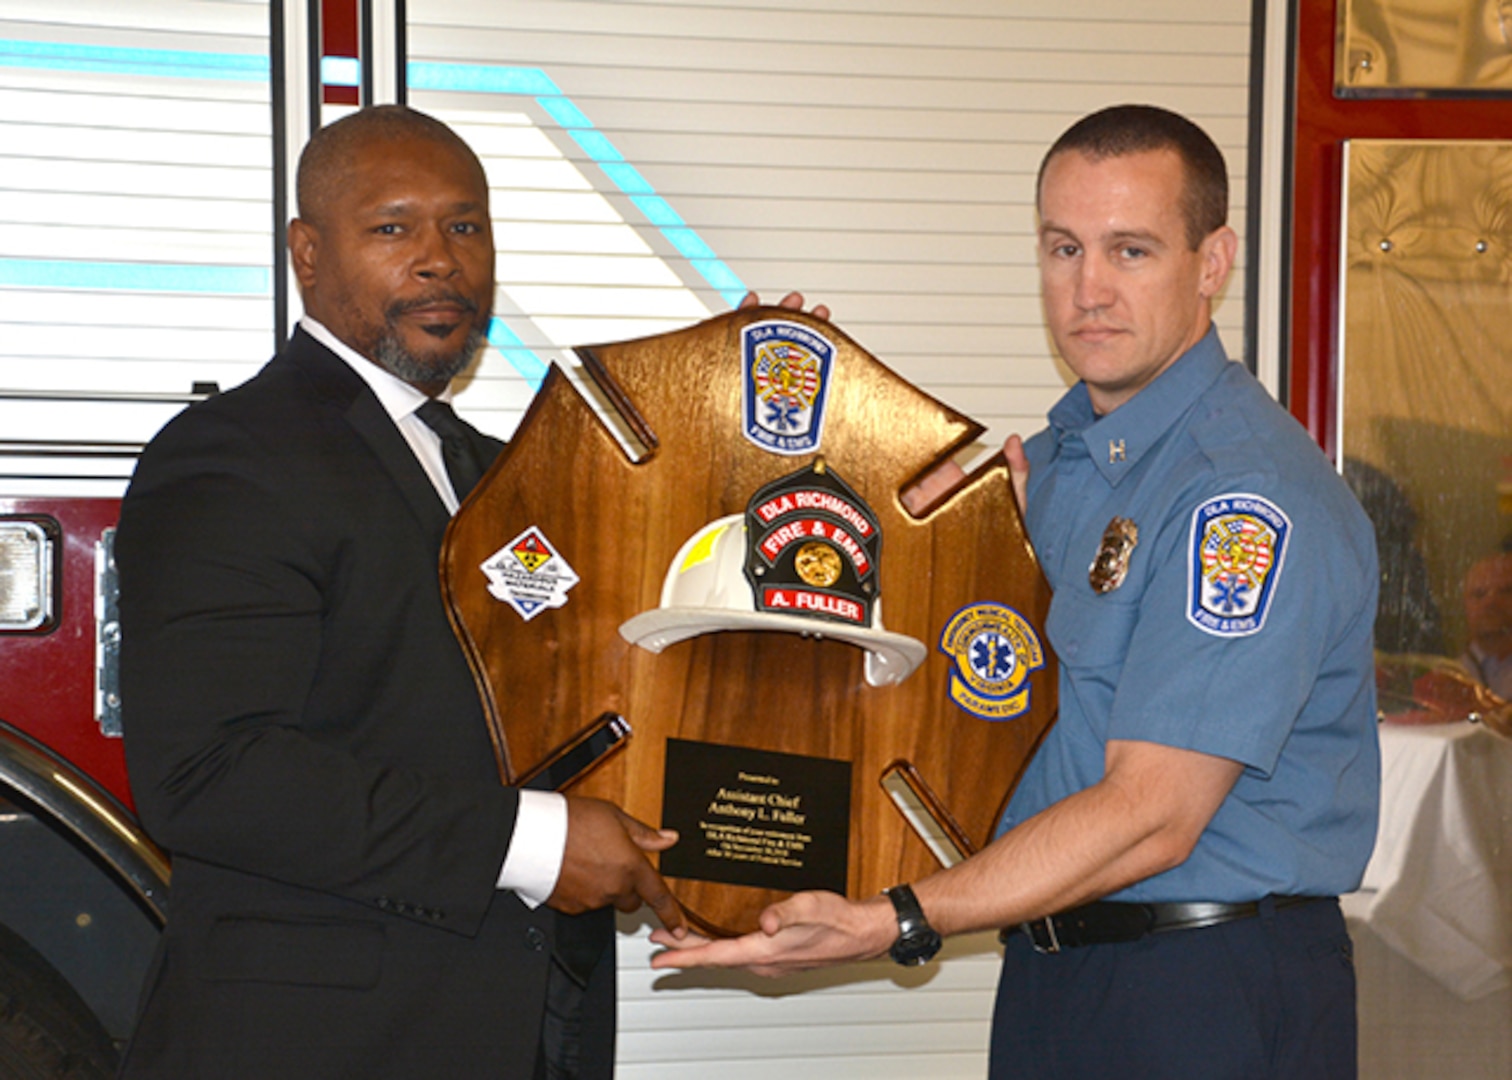 Assistant Fire Chief Fuller receives plaque at his retirement ceremony